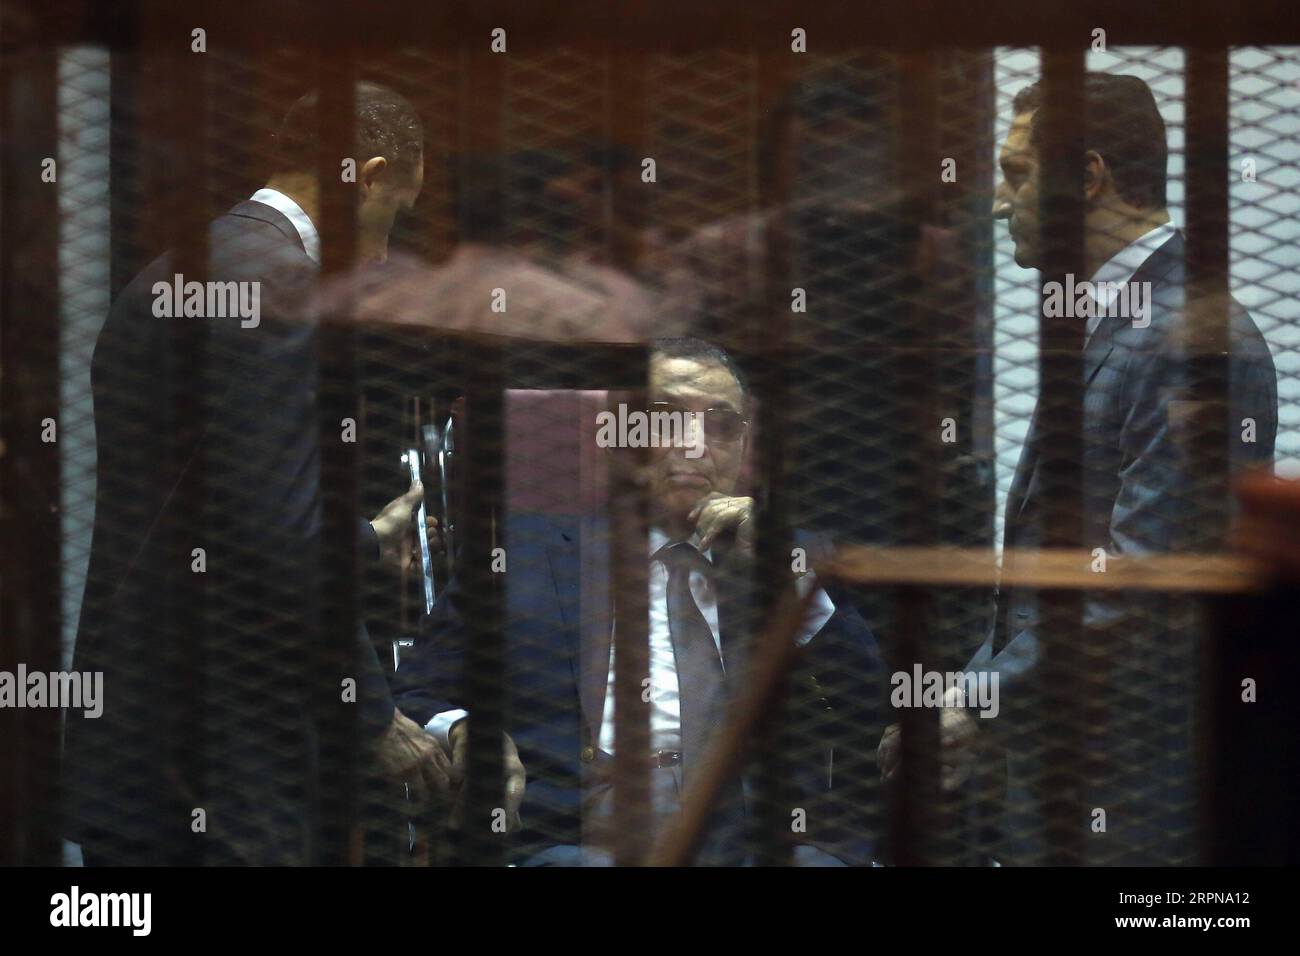 200225 -- CAIRO, Feb. 25, 2020 -- File photo taken on May 9, 2015 shows Hosni Mubarak C, his sons Gamal Mubarak L and Alaa Mubarak behind the defendants cage at a court in Cairo, Egypt. Egyptian former President Hosni Mubarak has died at the age of 91 after suffering a long illness, state-run Nile TV reported on Tuesday. Ahmed Gomaa EGYPT-CAIRO-MUBARAK-PASS AWAY WuxHuiwo PUBLICATIONxNOTxINxCHN Stock Photo